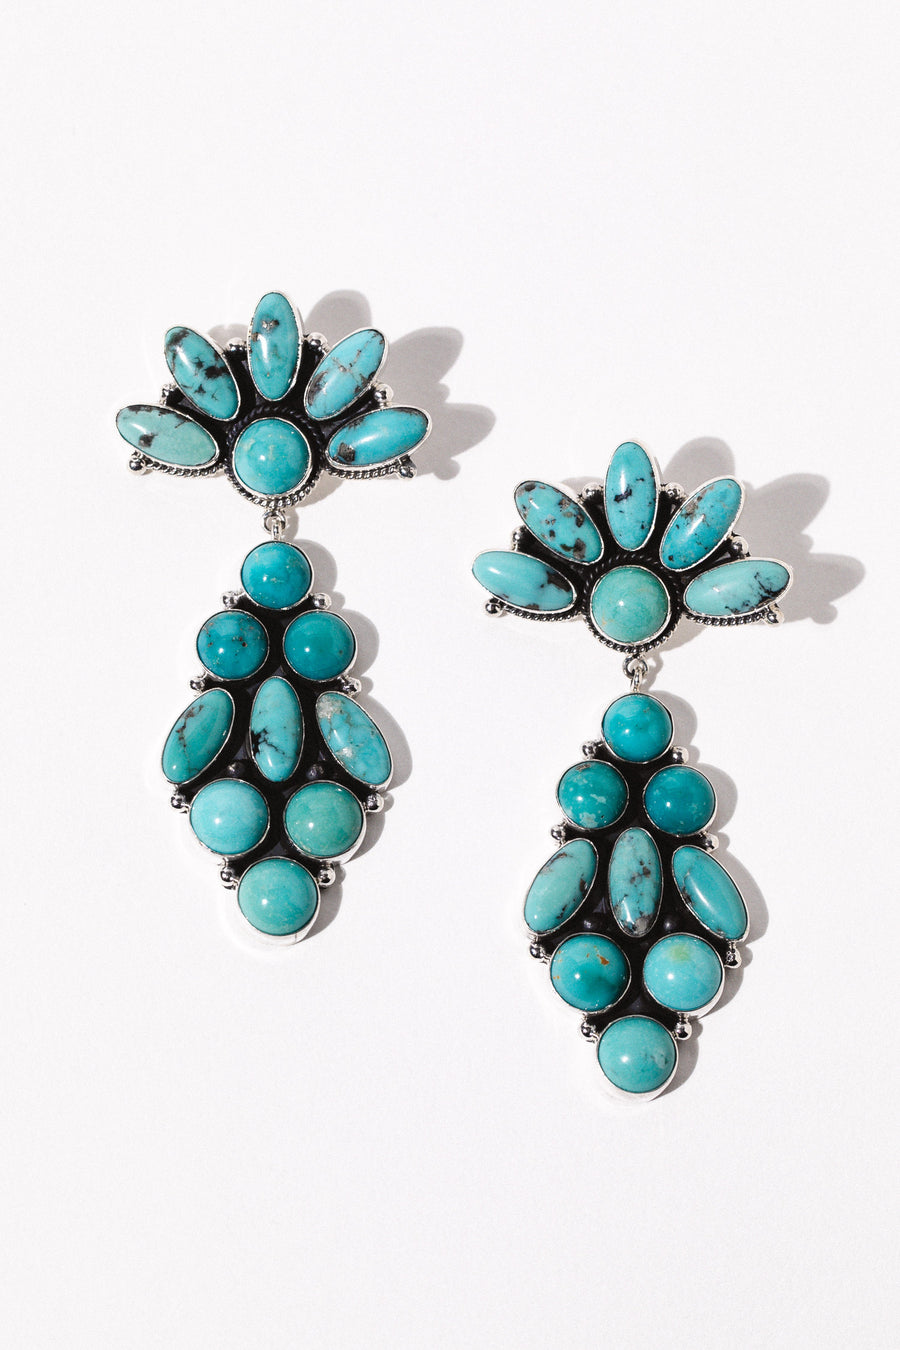 Sunwest Jewelry Silver / Turquoise Chimalus Turquoise Statement Earrings